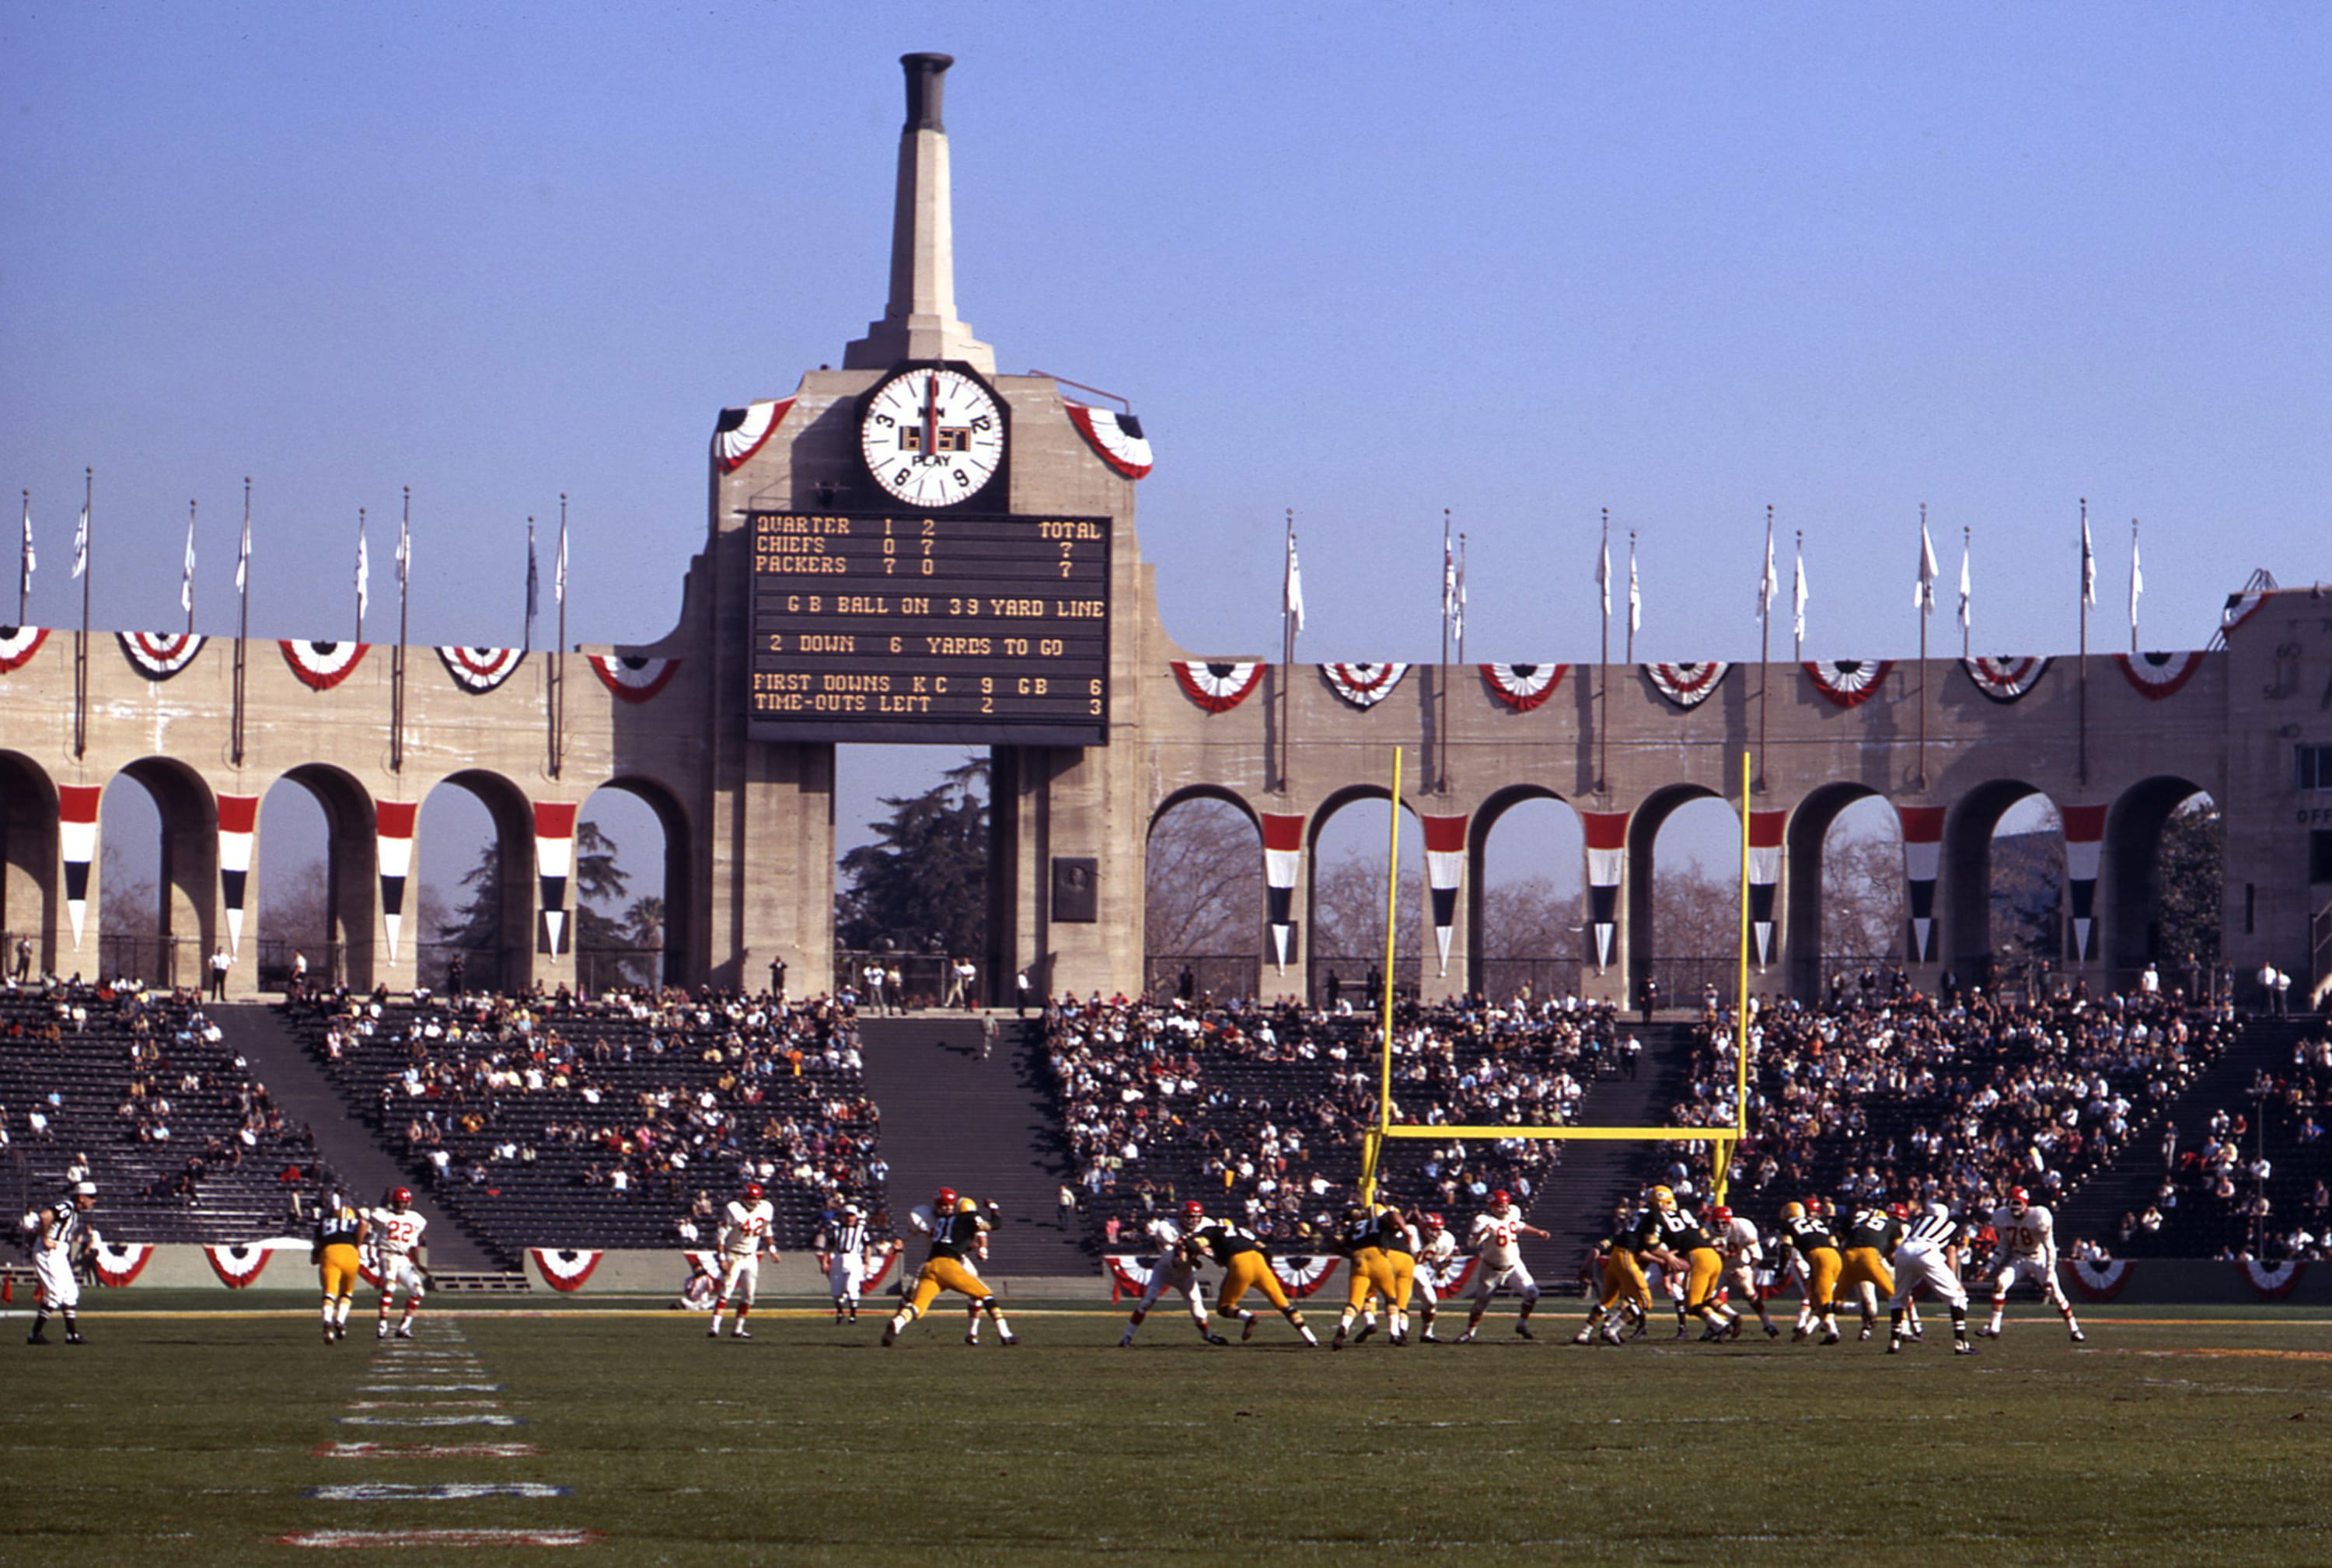 The first Super Bowl was played between the Green Bay Packers and Kansas City Chiefs at the Coliseum on Jan. 15, 1967